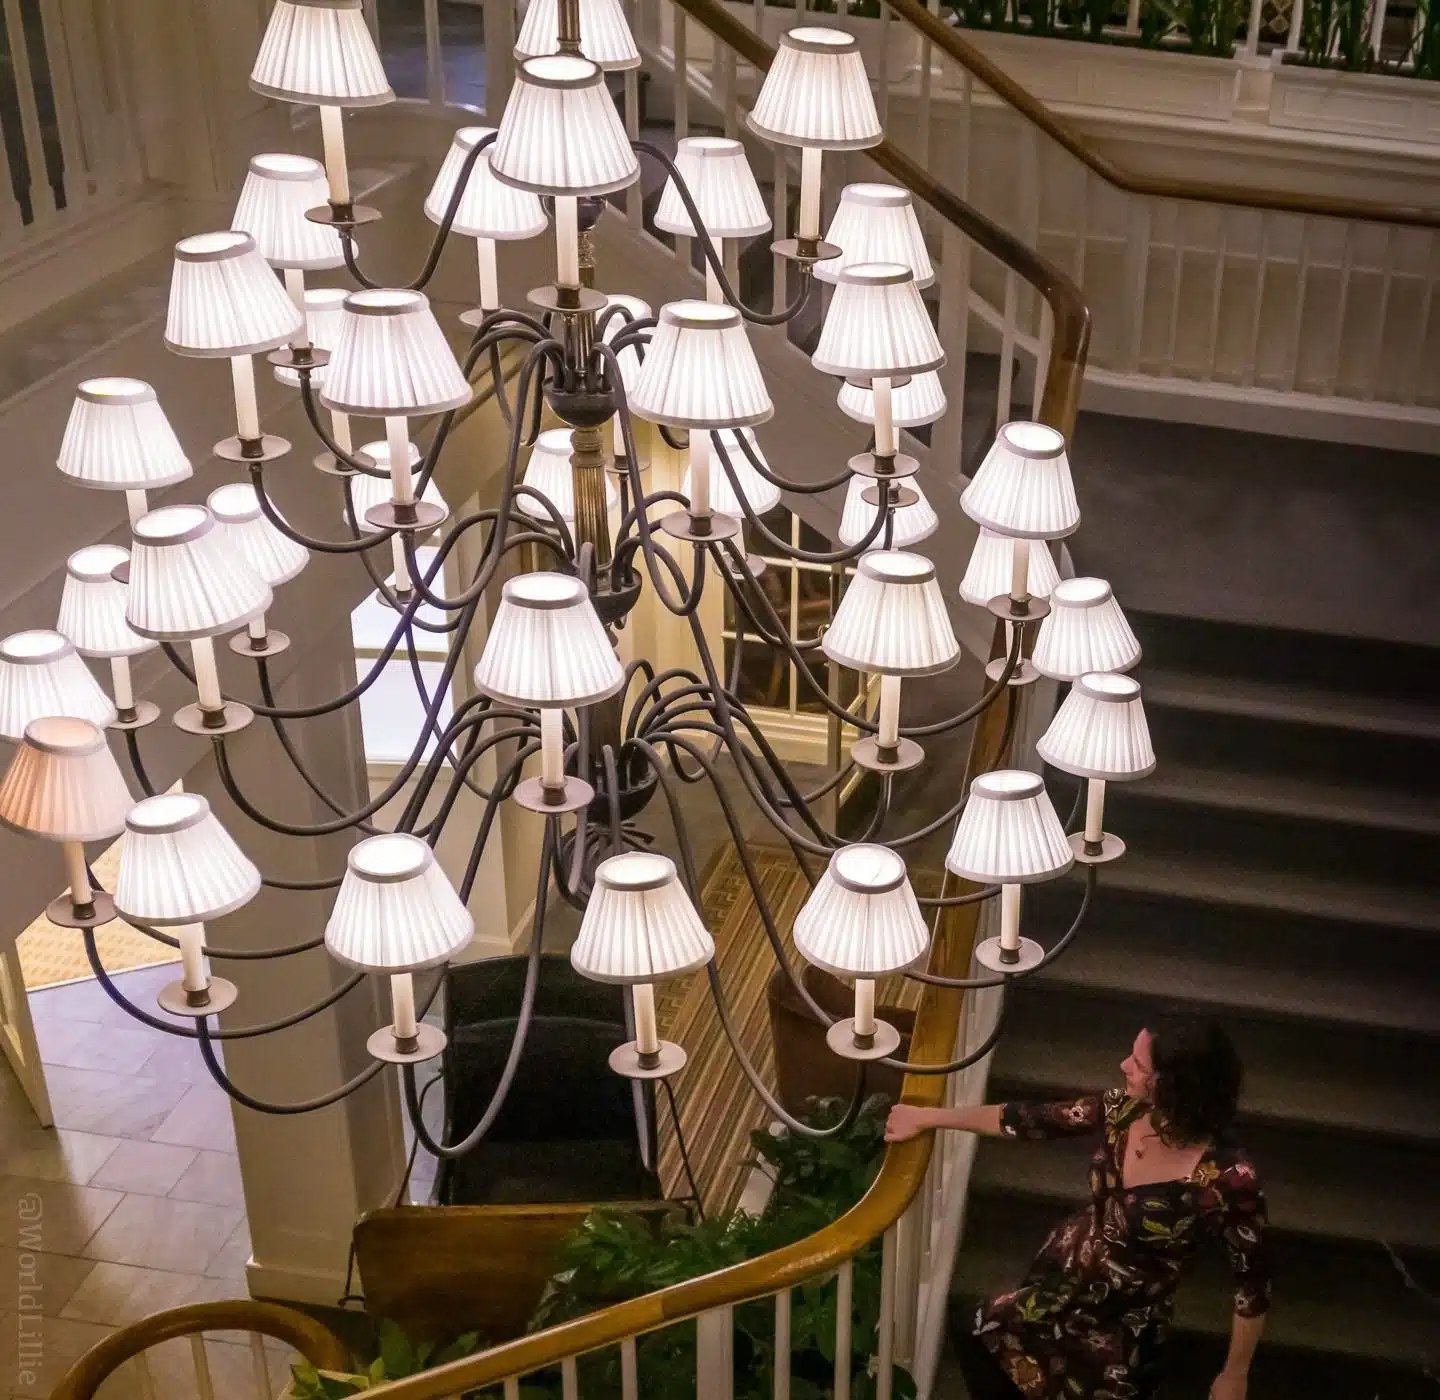 The grand chandelier and staircase of the Woodstock Inn.